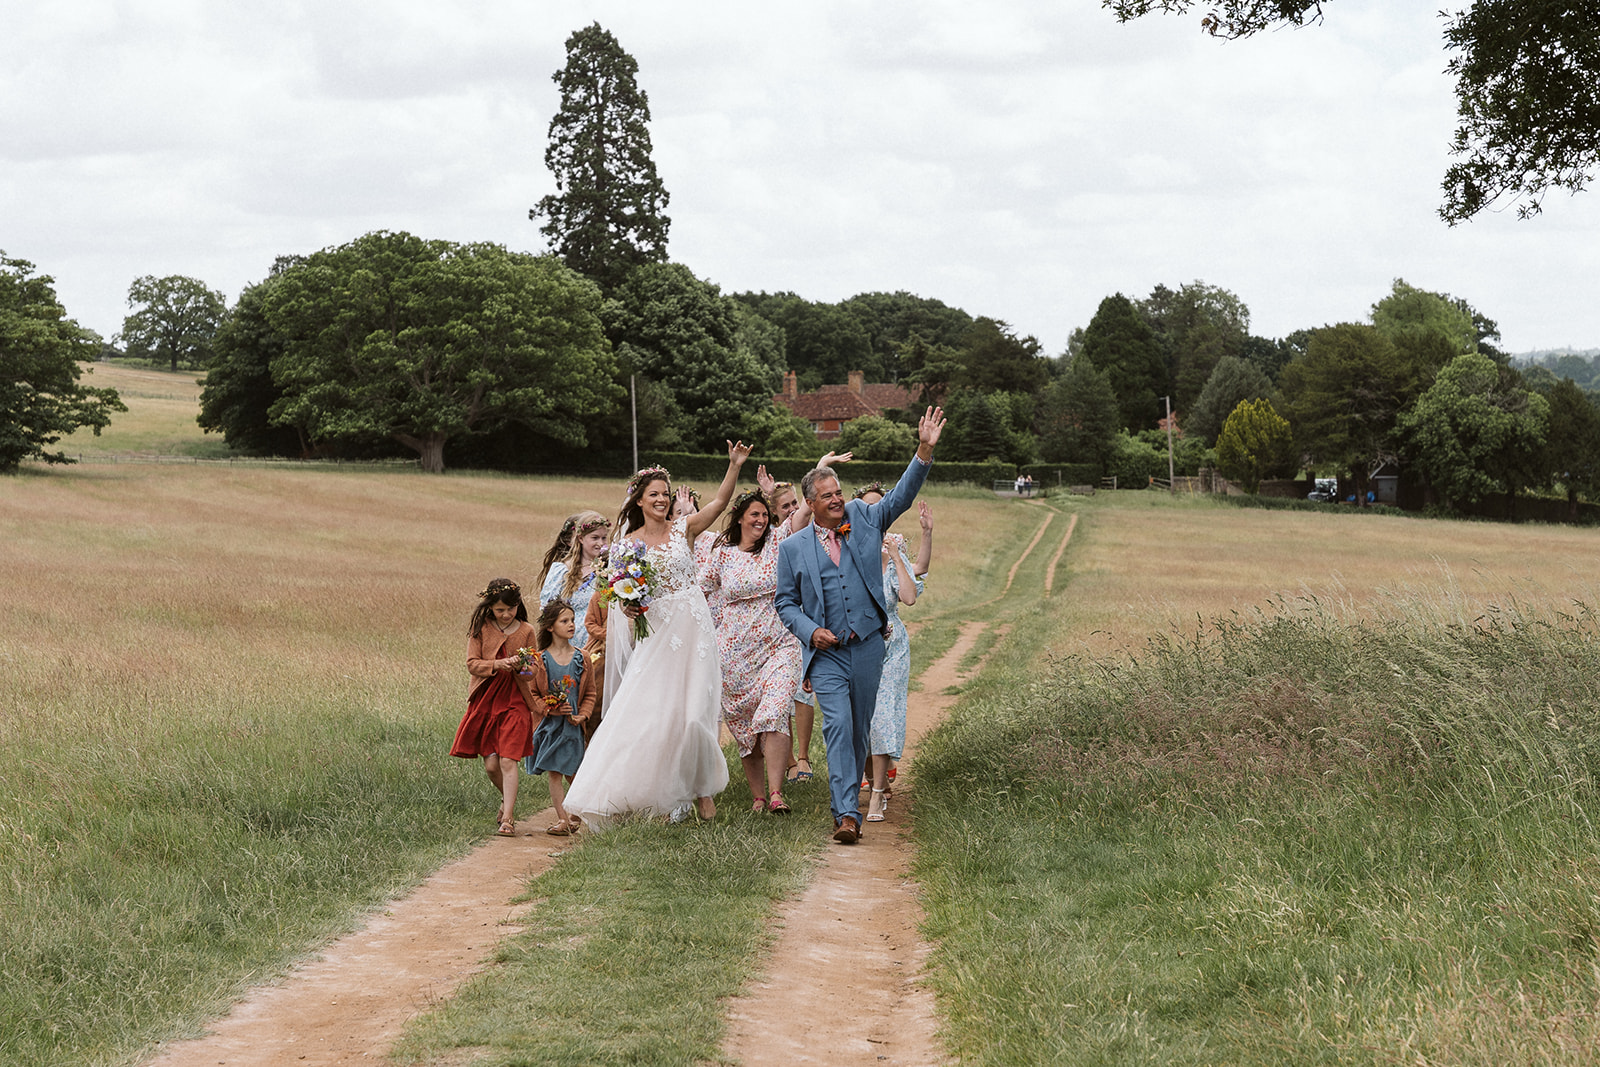 Sophie and Raphs Franglais outdoor wedding in Surrey countryside